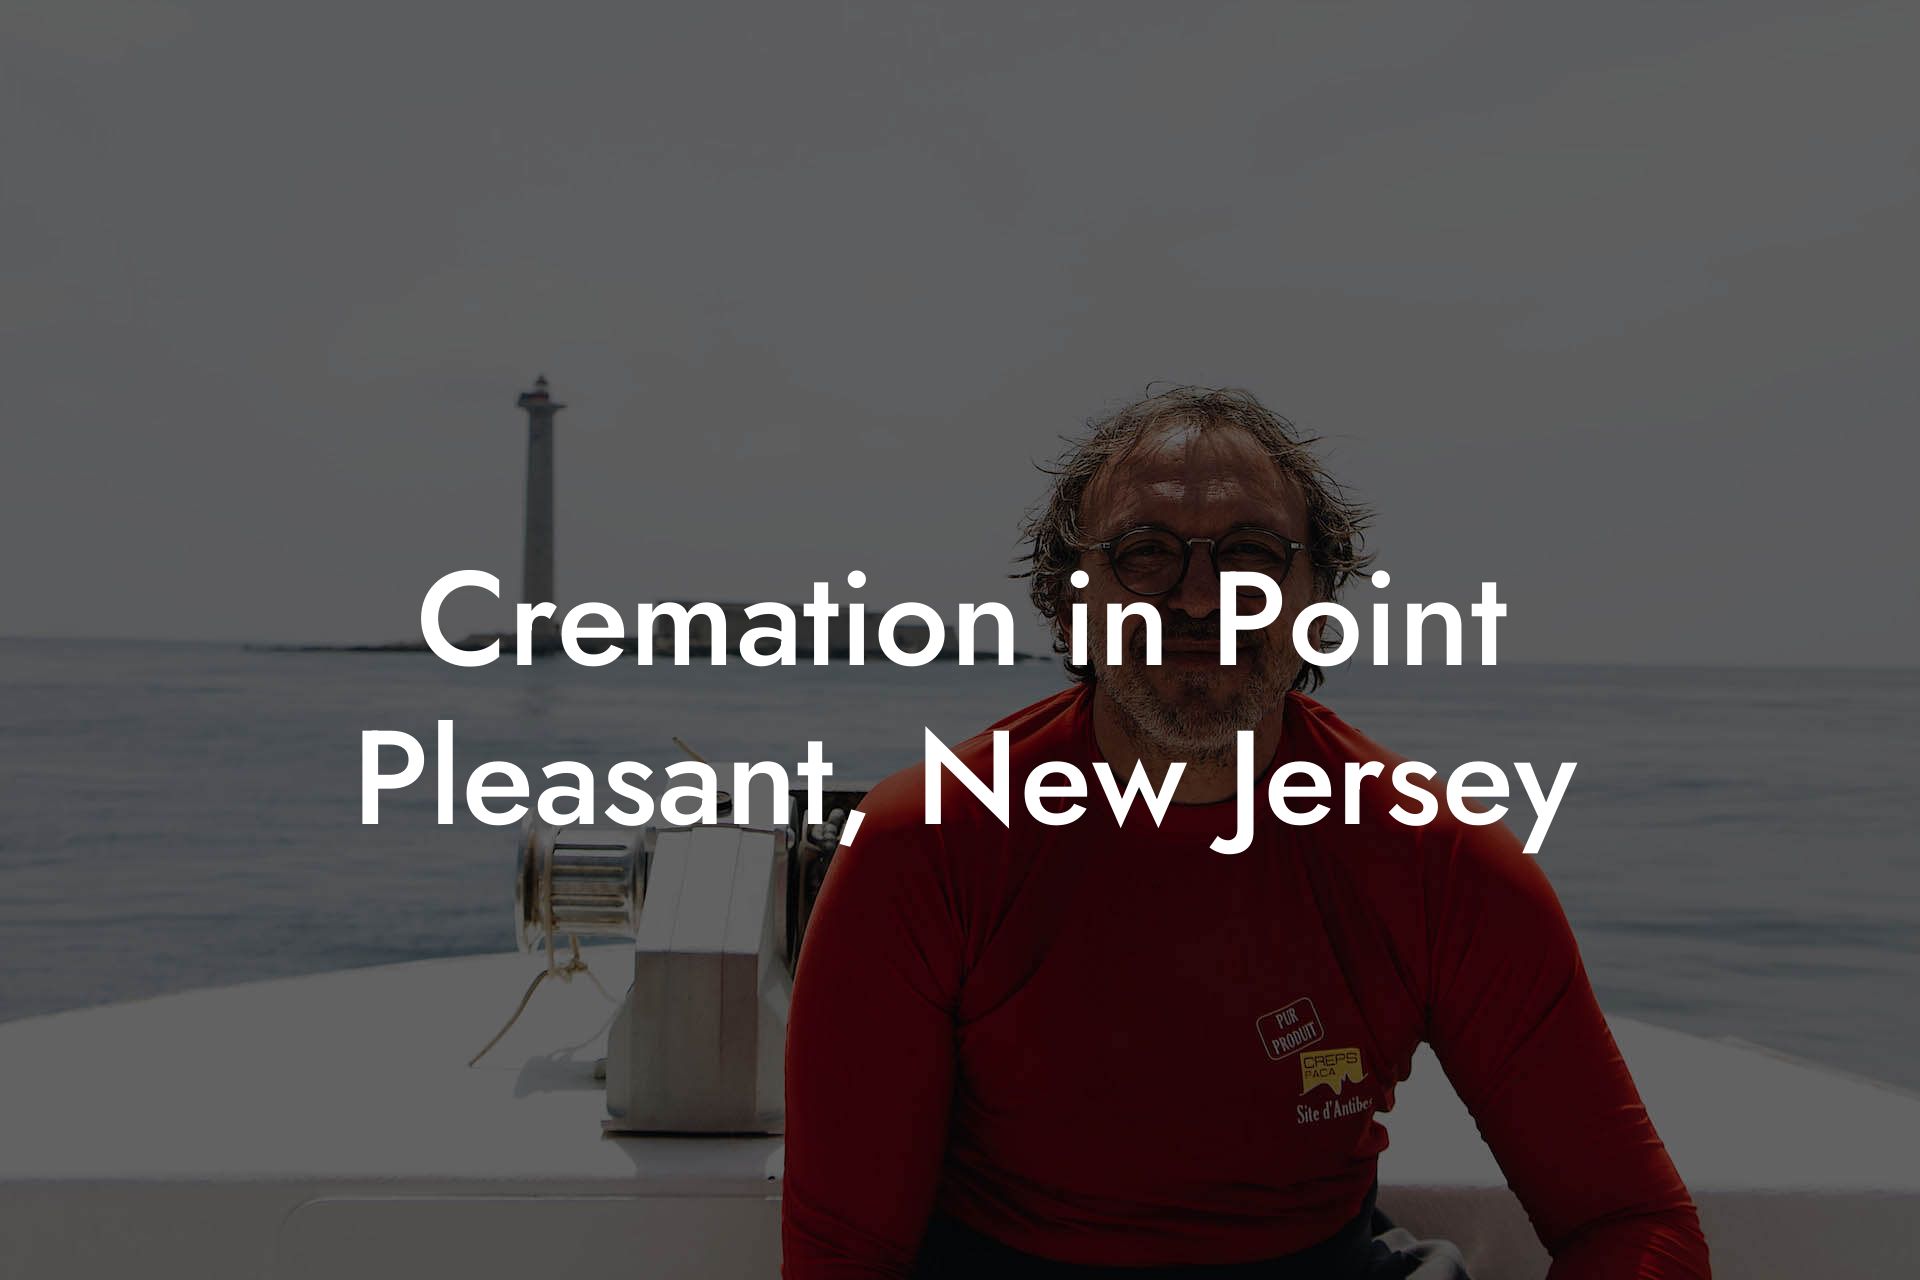 Cremation in Point Pleasant, New Jersey